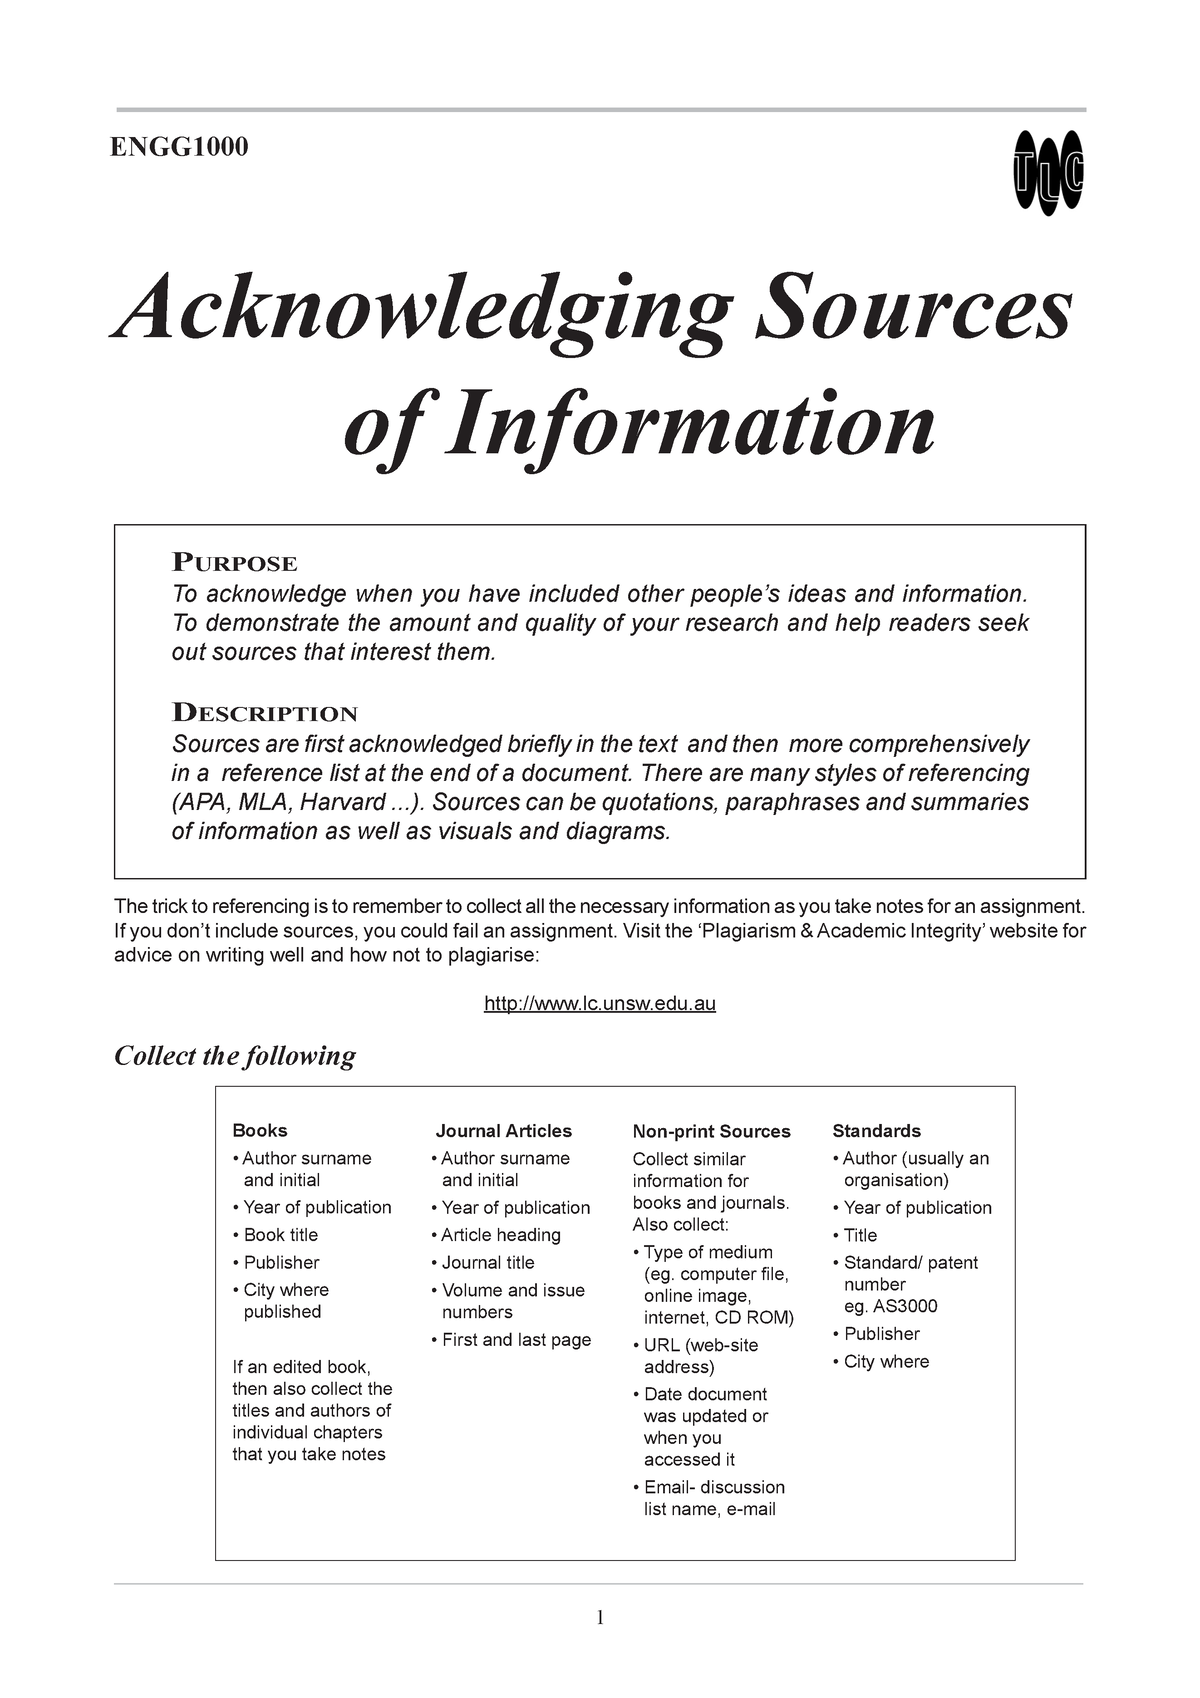 reasons for acknowledging sources of information in an essay